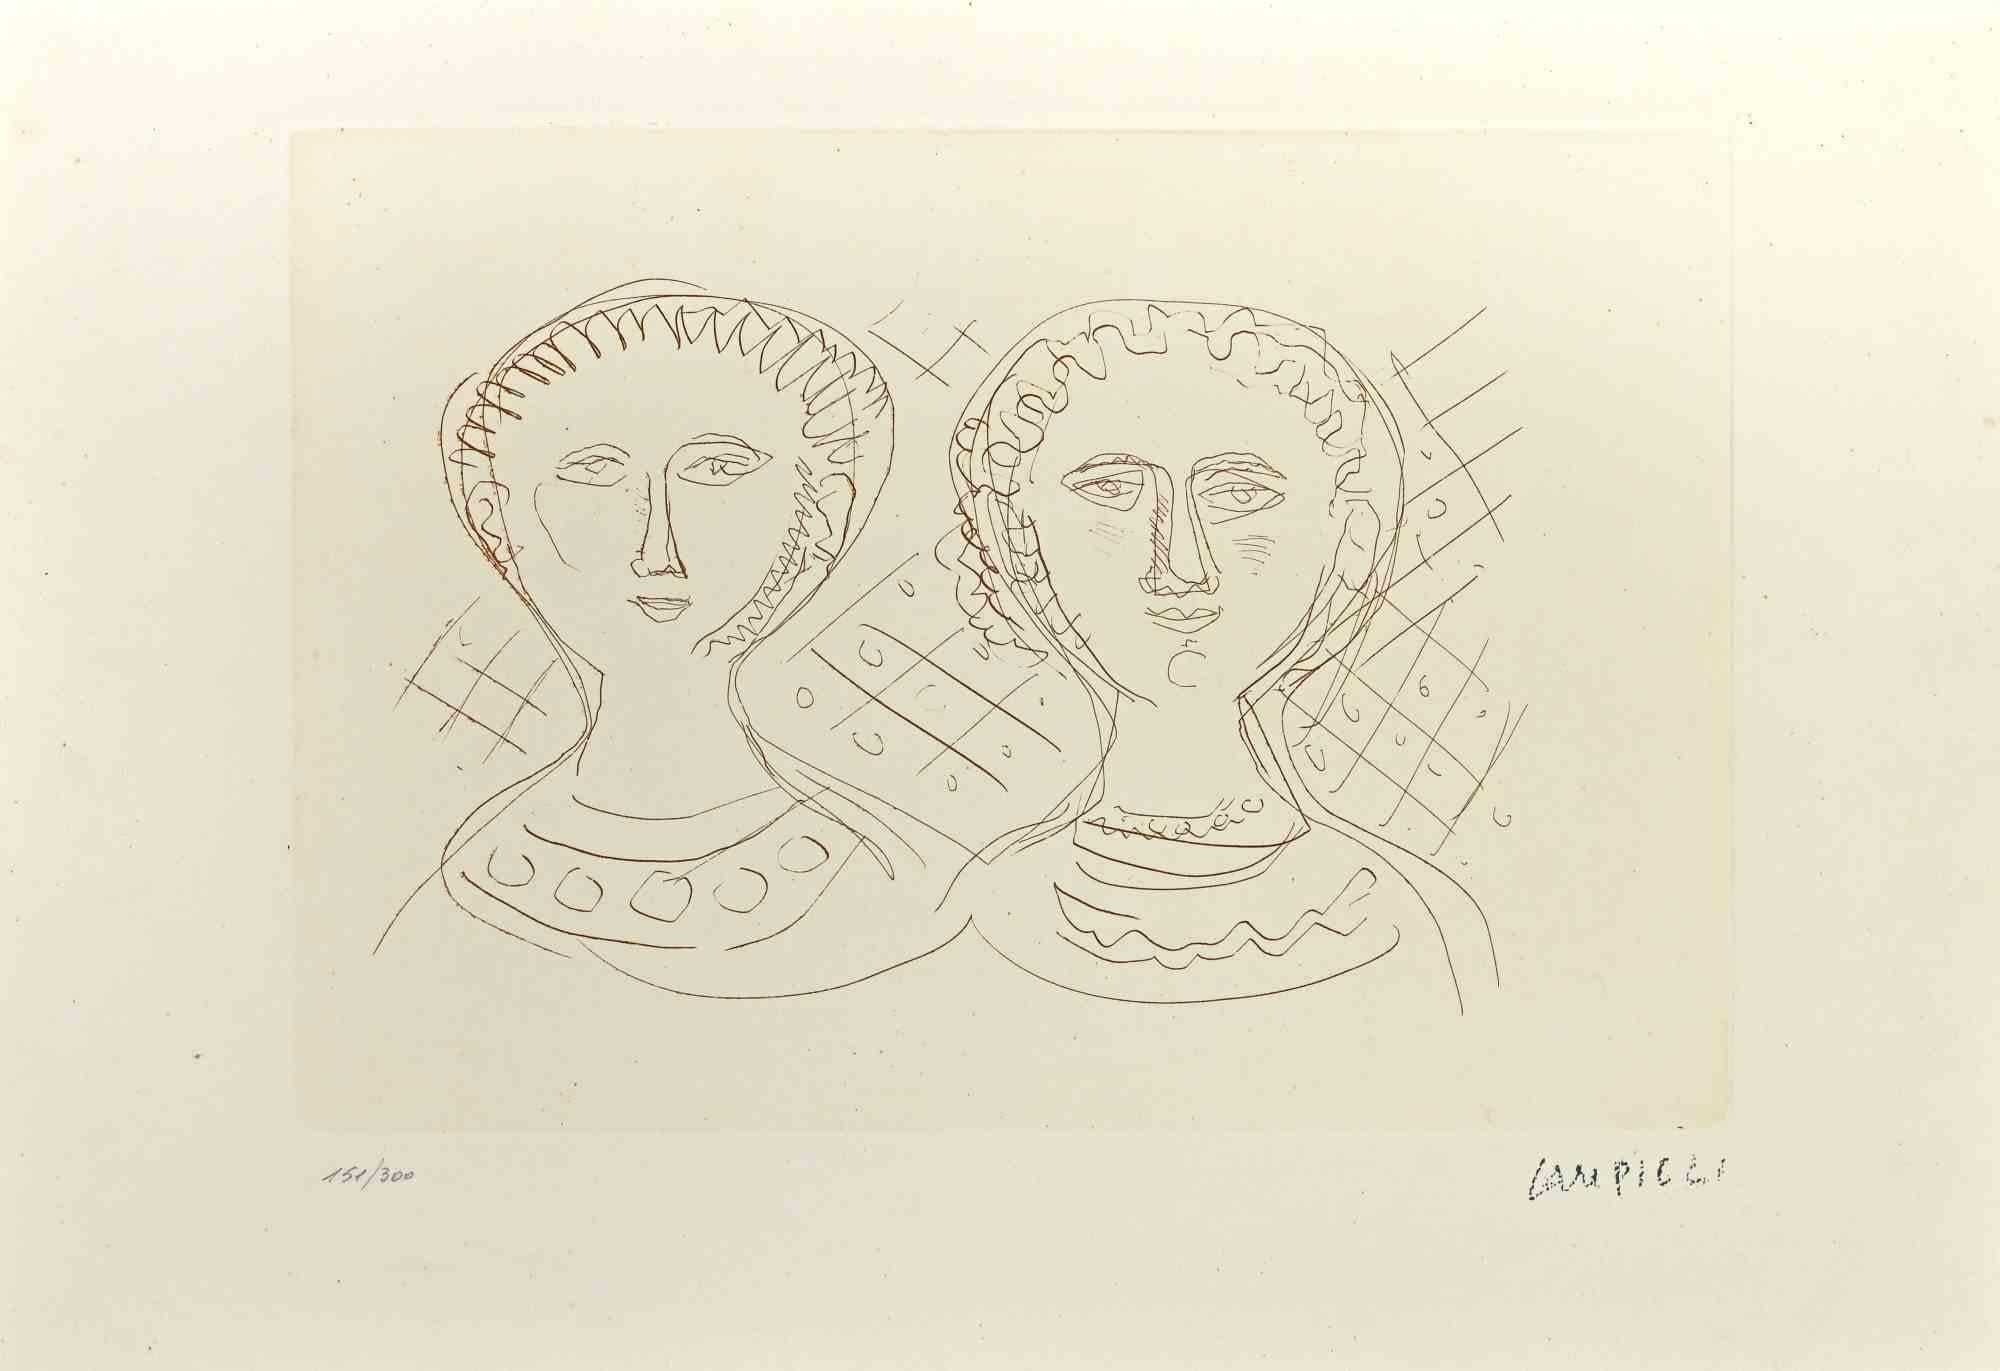 Two faces of Women  is a print realized by Massimo Campigli in the 1965.

Etching on paper. The artwork is  signed on plate on the lower right margin and numbered es. 151/300 on the left corner. 

This artwork is part of "The Memories of Casanova"